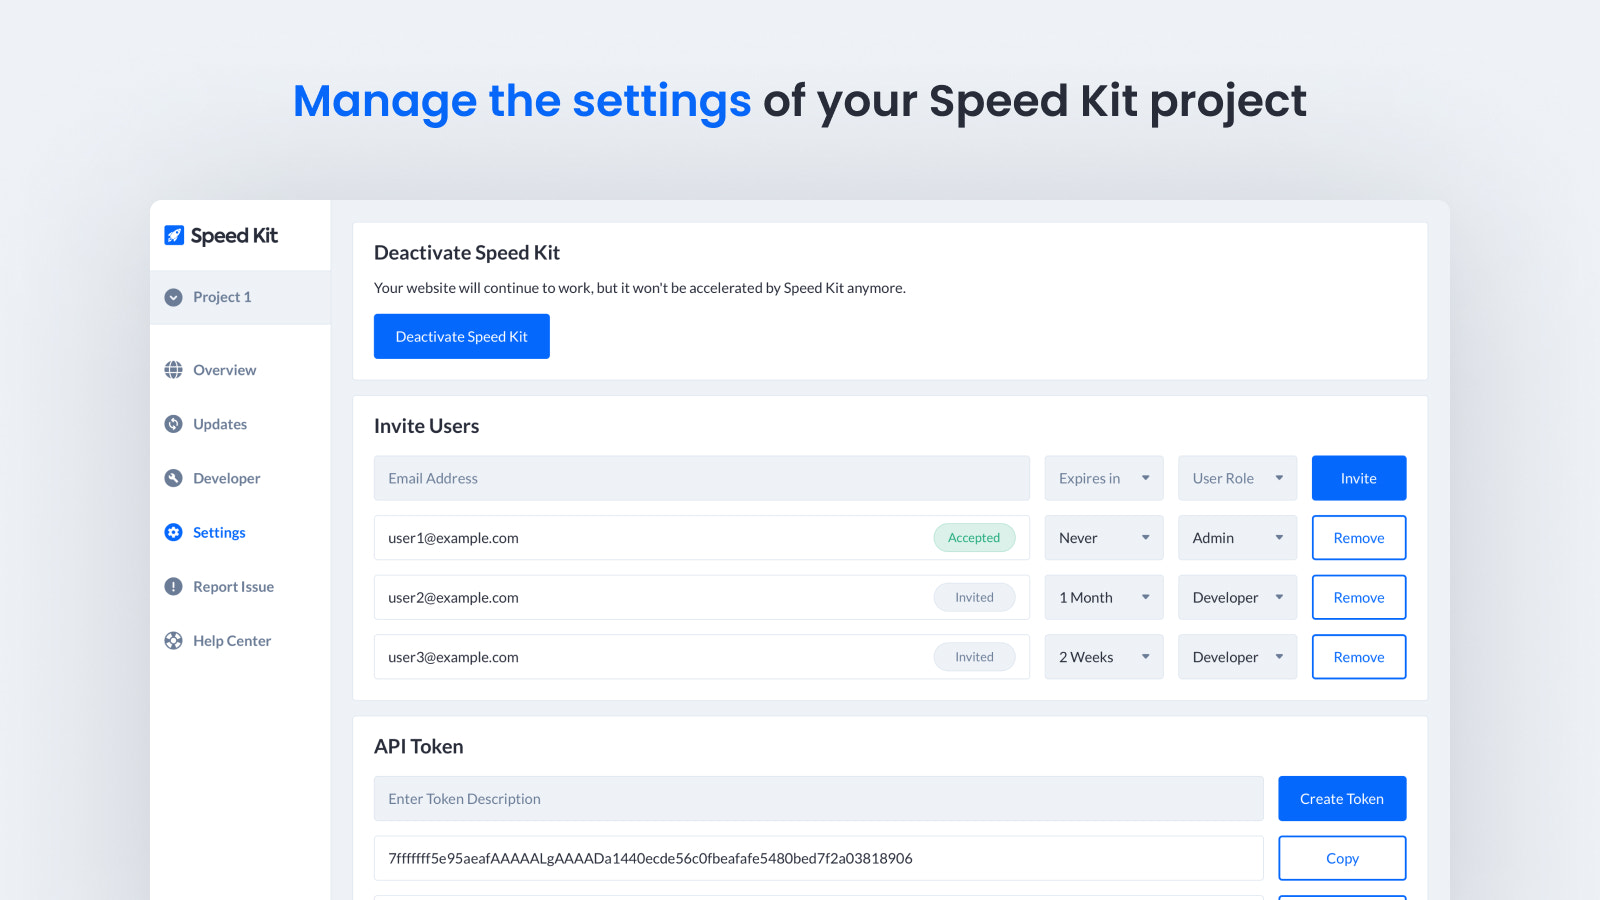 Manage the settings of your Speed Kit project